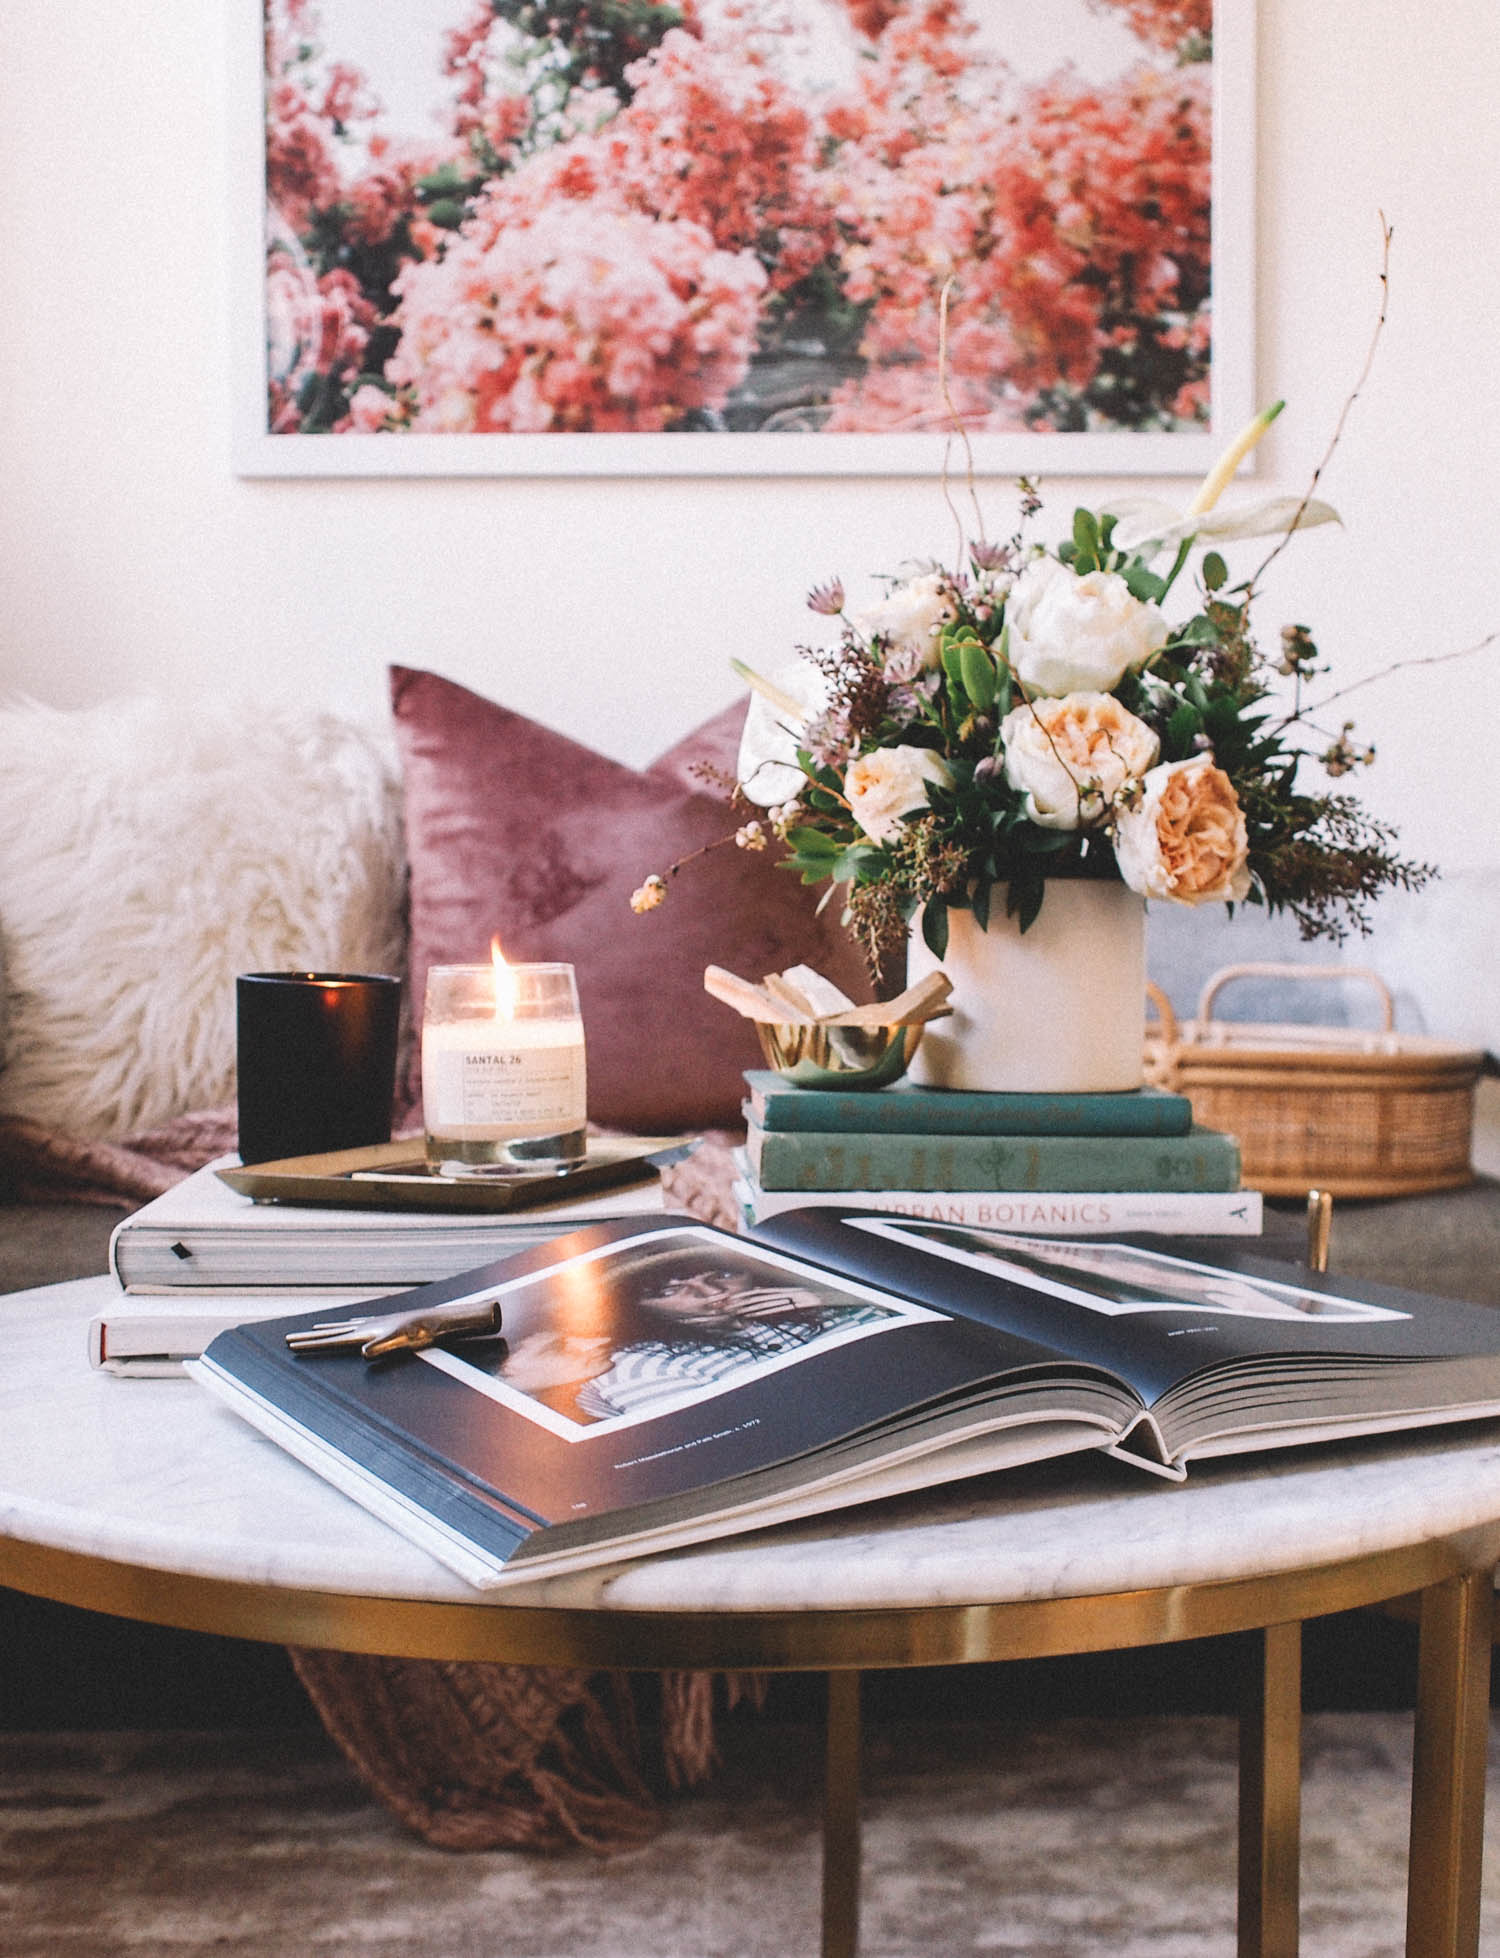 How To Pick The Right Coffee Table Book